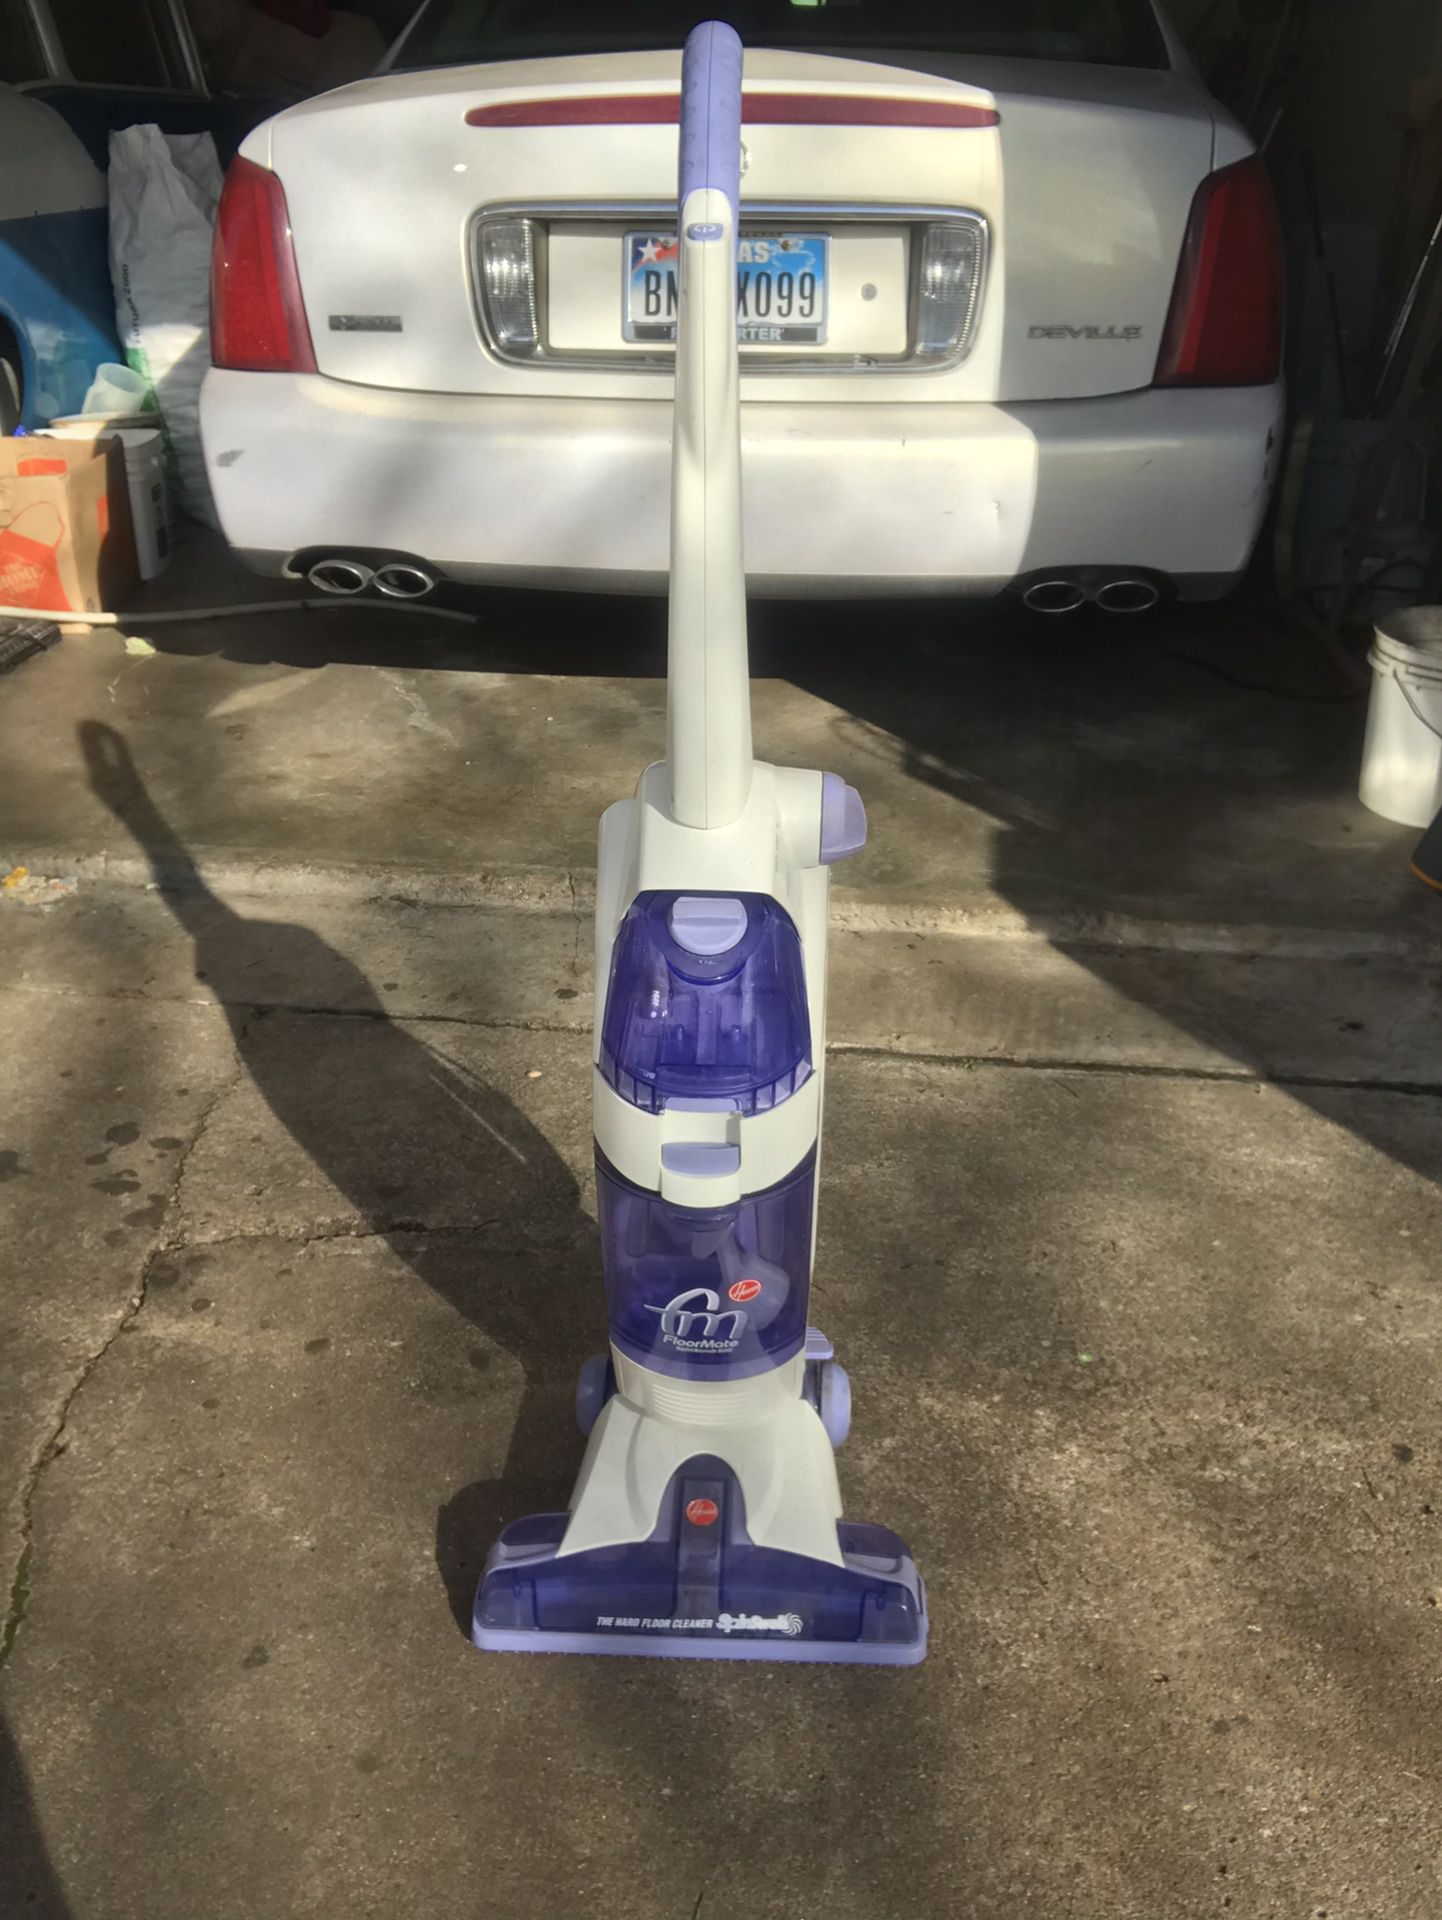 Hoover Floor Mate Spin Scrub 500, like new,Hard Wood Floor Scrubber and Ceramic Tile Floor Scrubber,like new condition,$60.00,obo